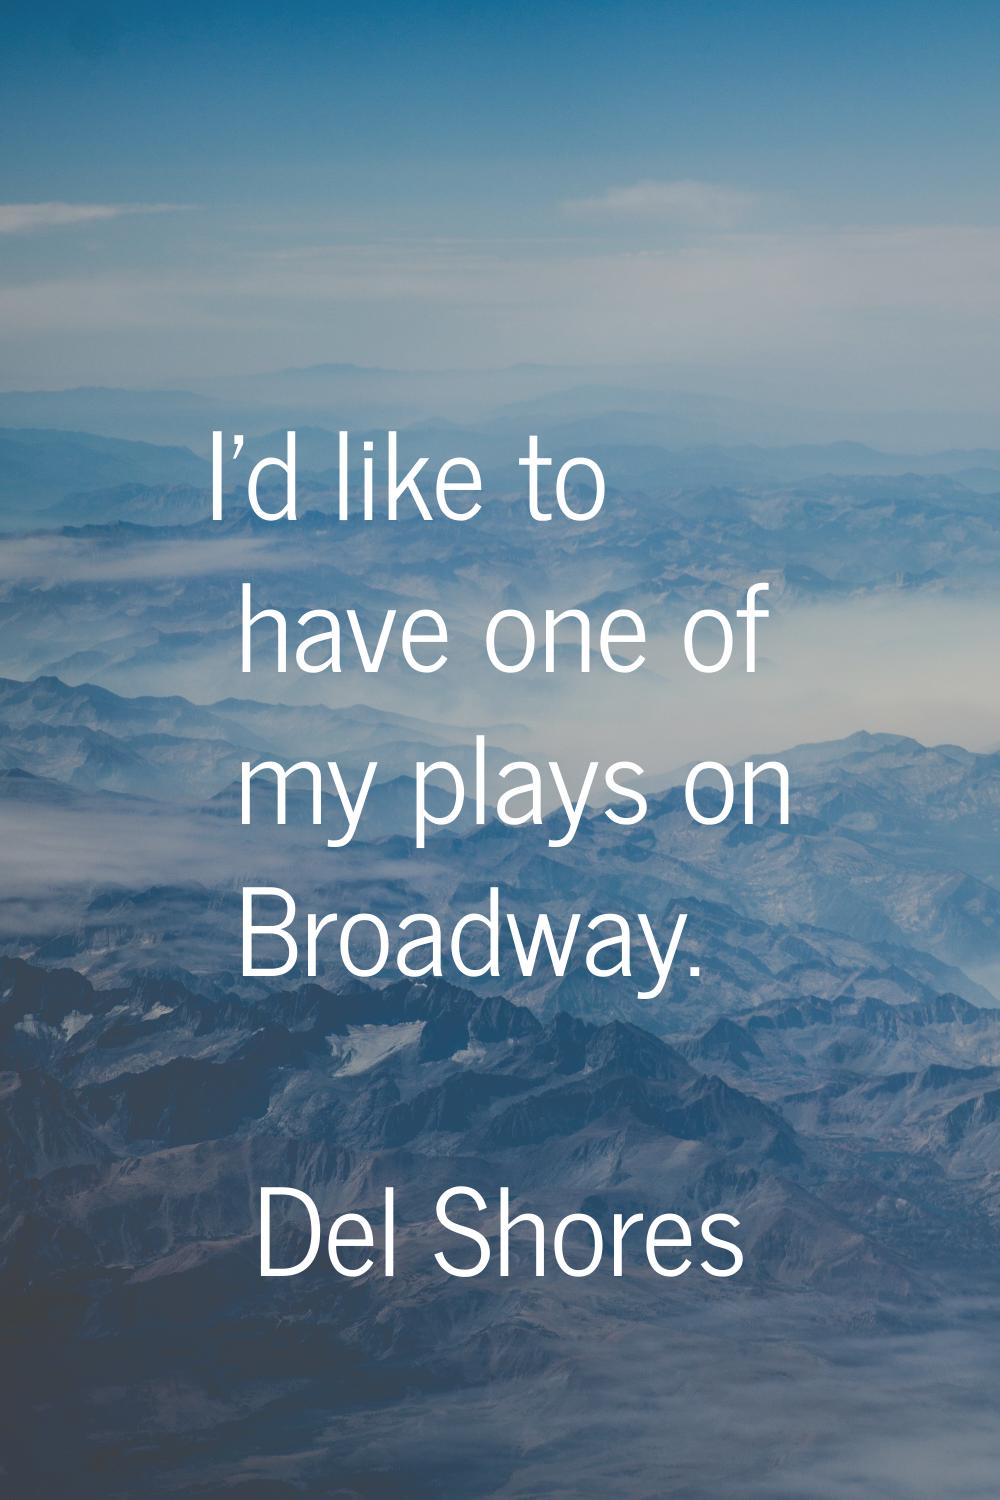 I'd like to have one of my plays on Broadway.